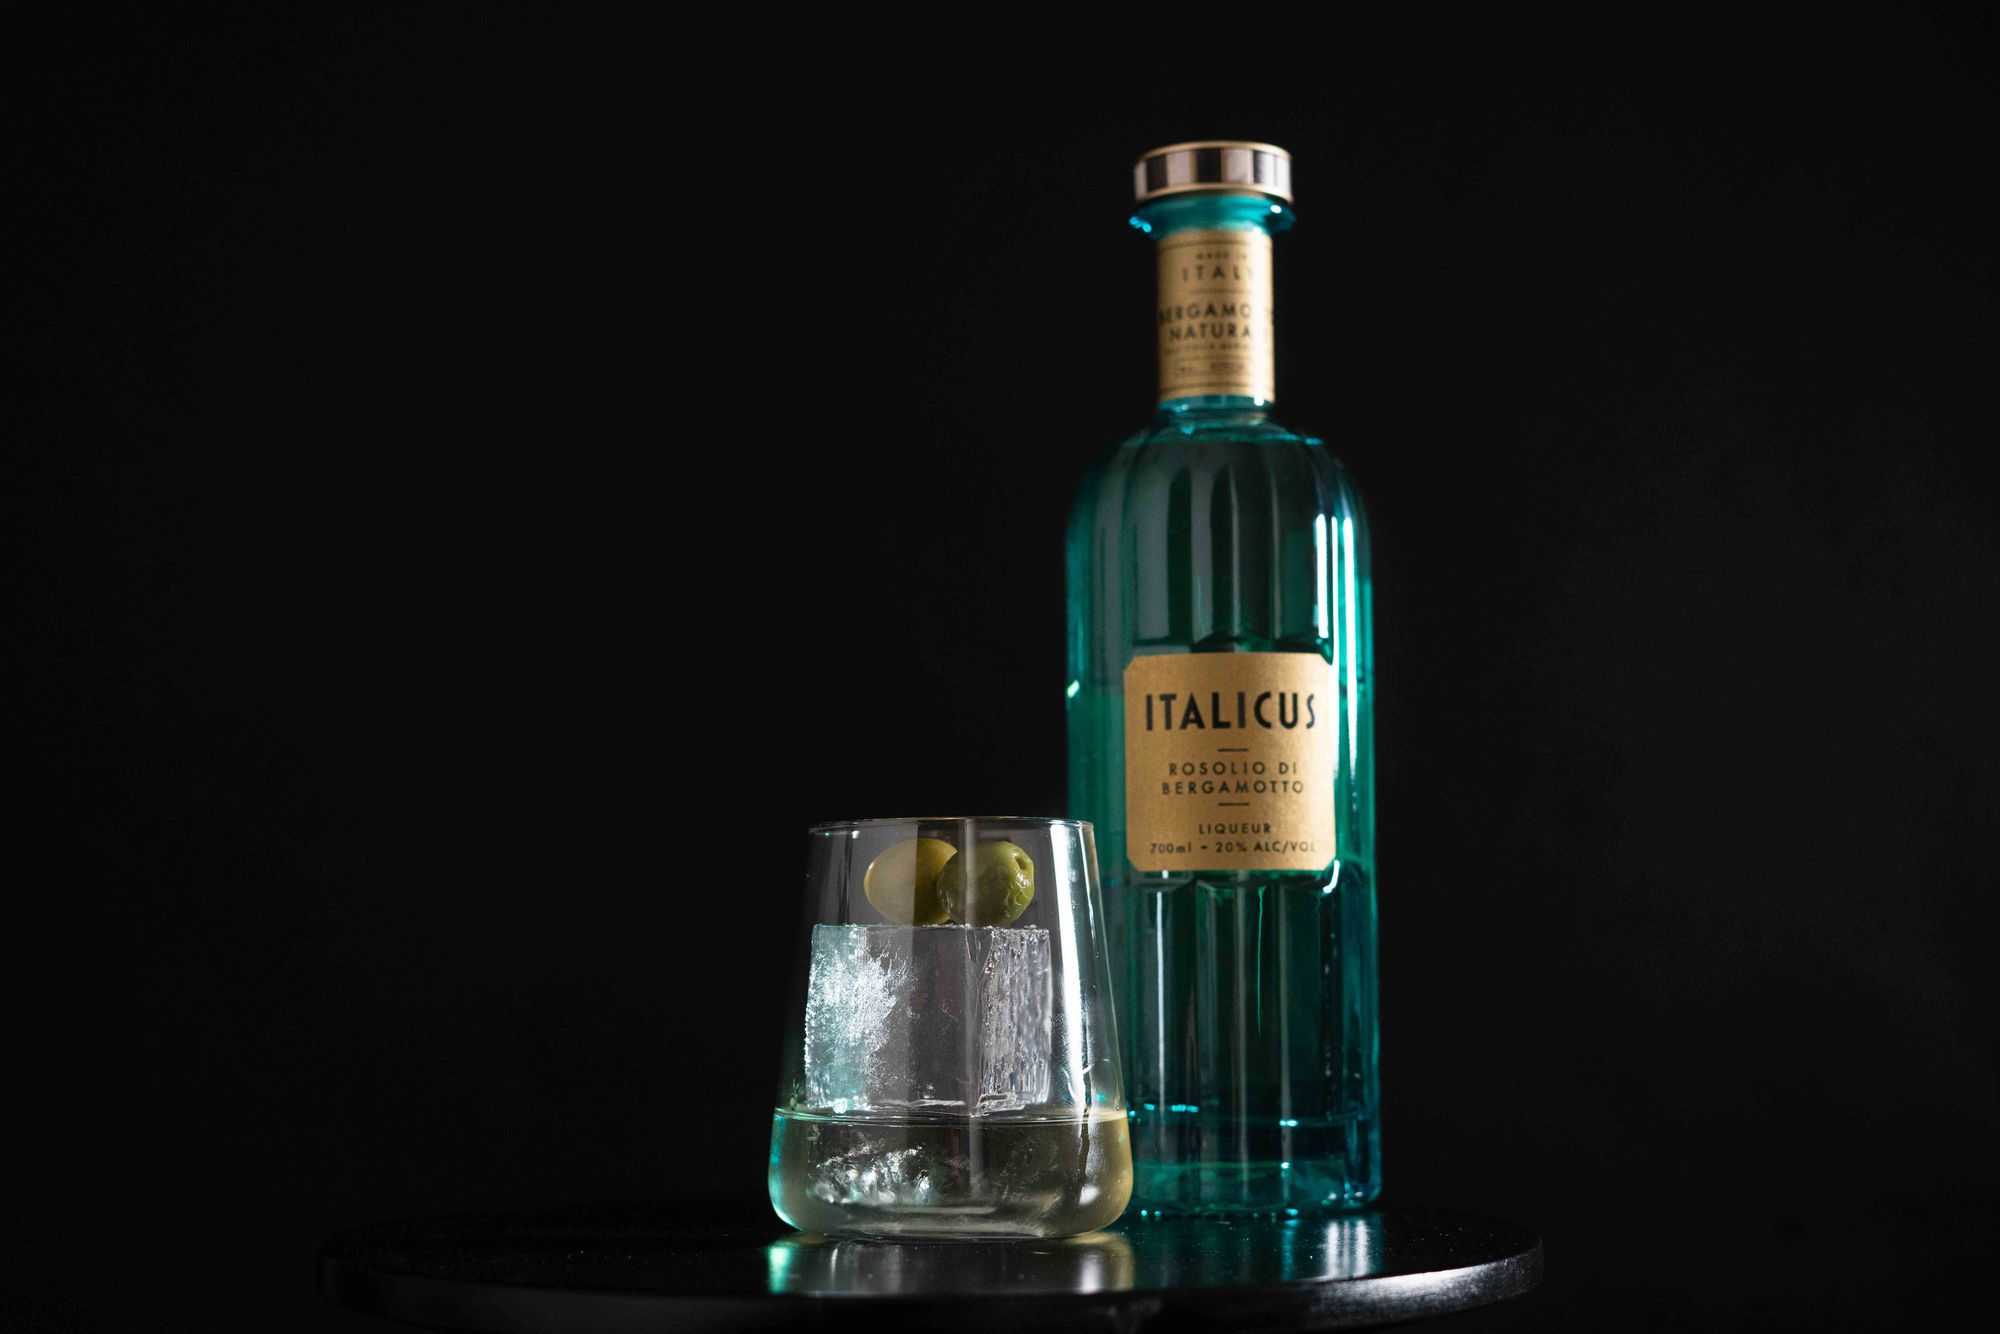 Negroni Bianco with Italicus. Photo: Boothby